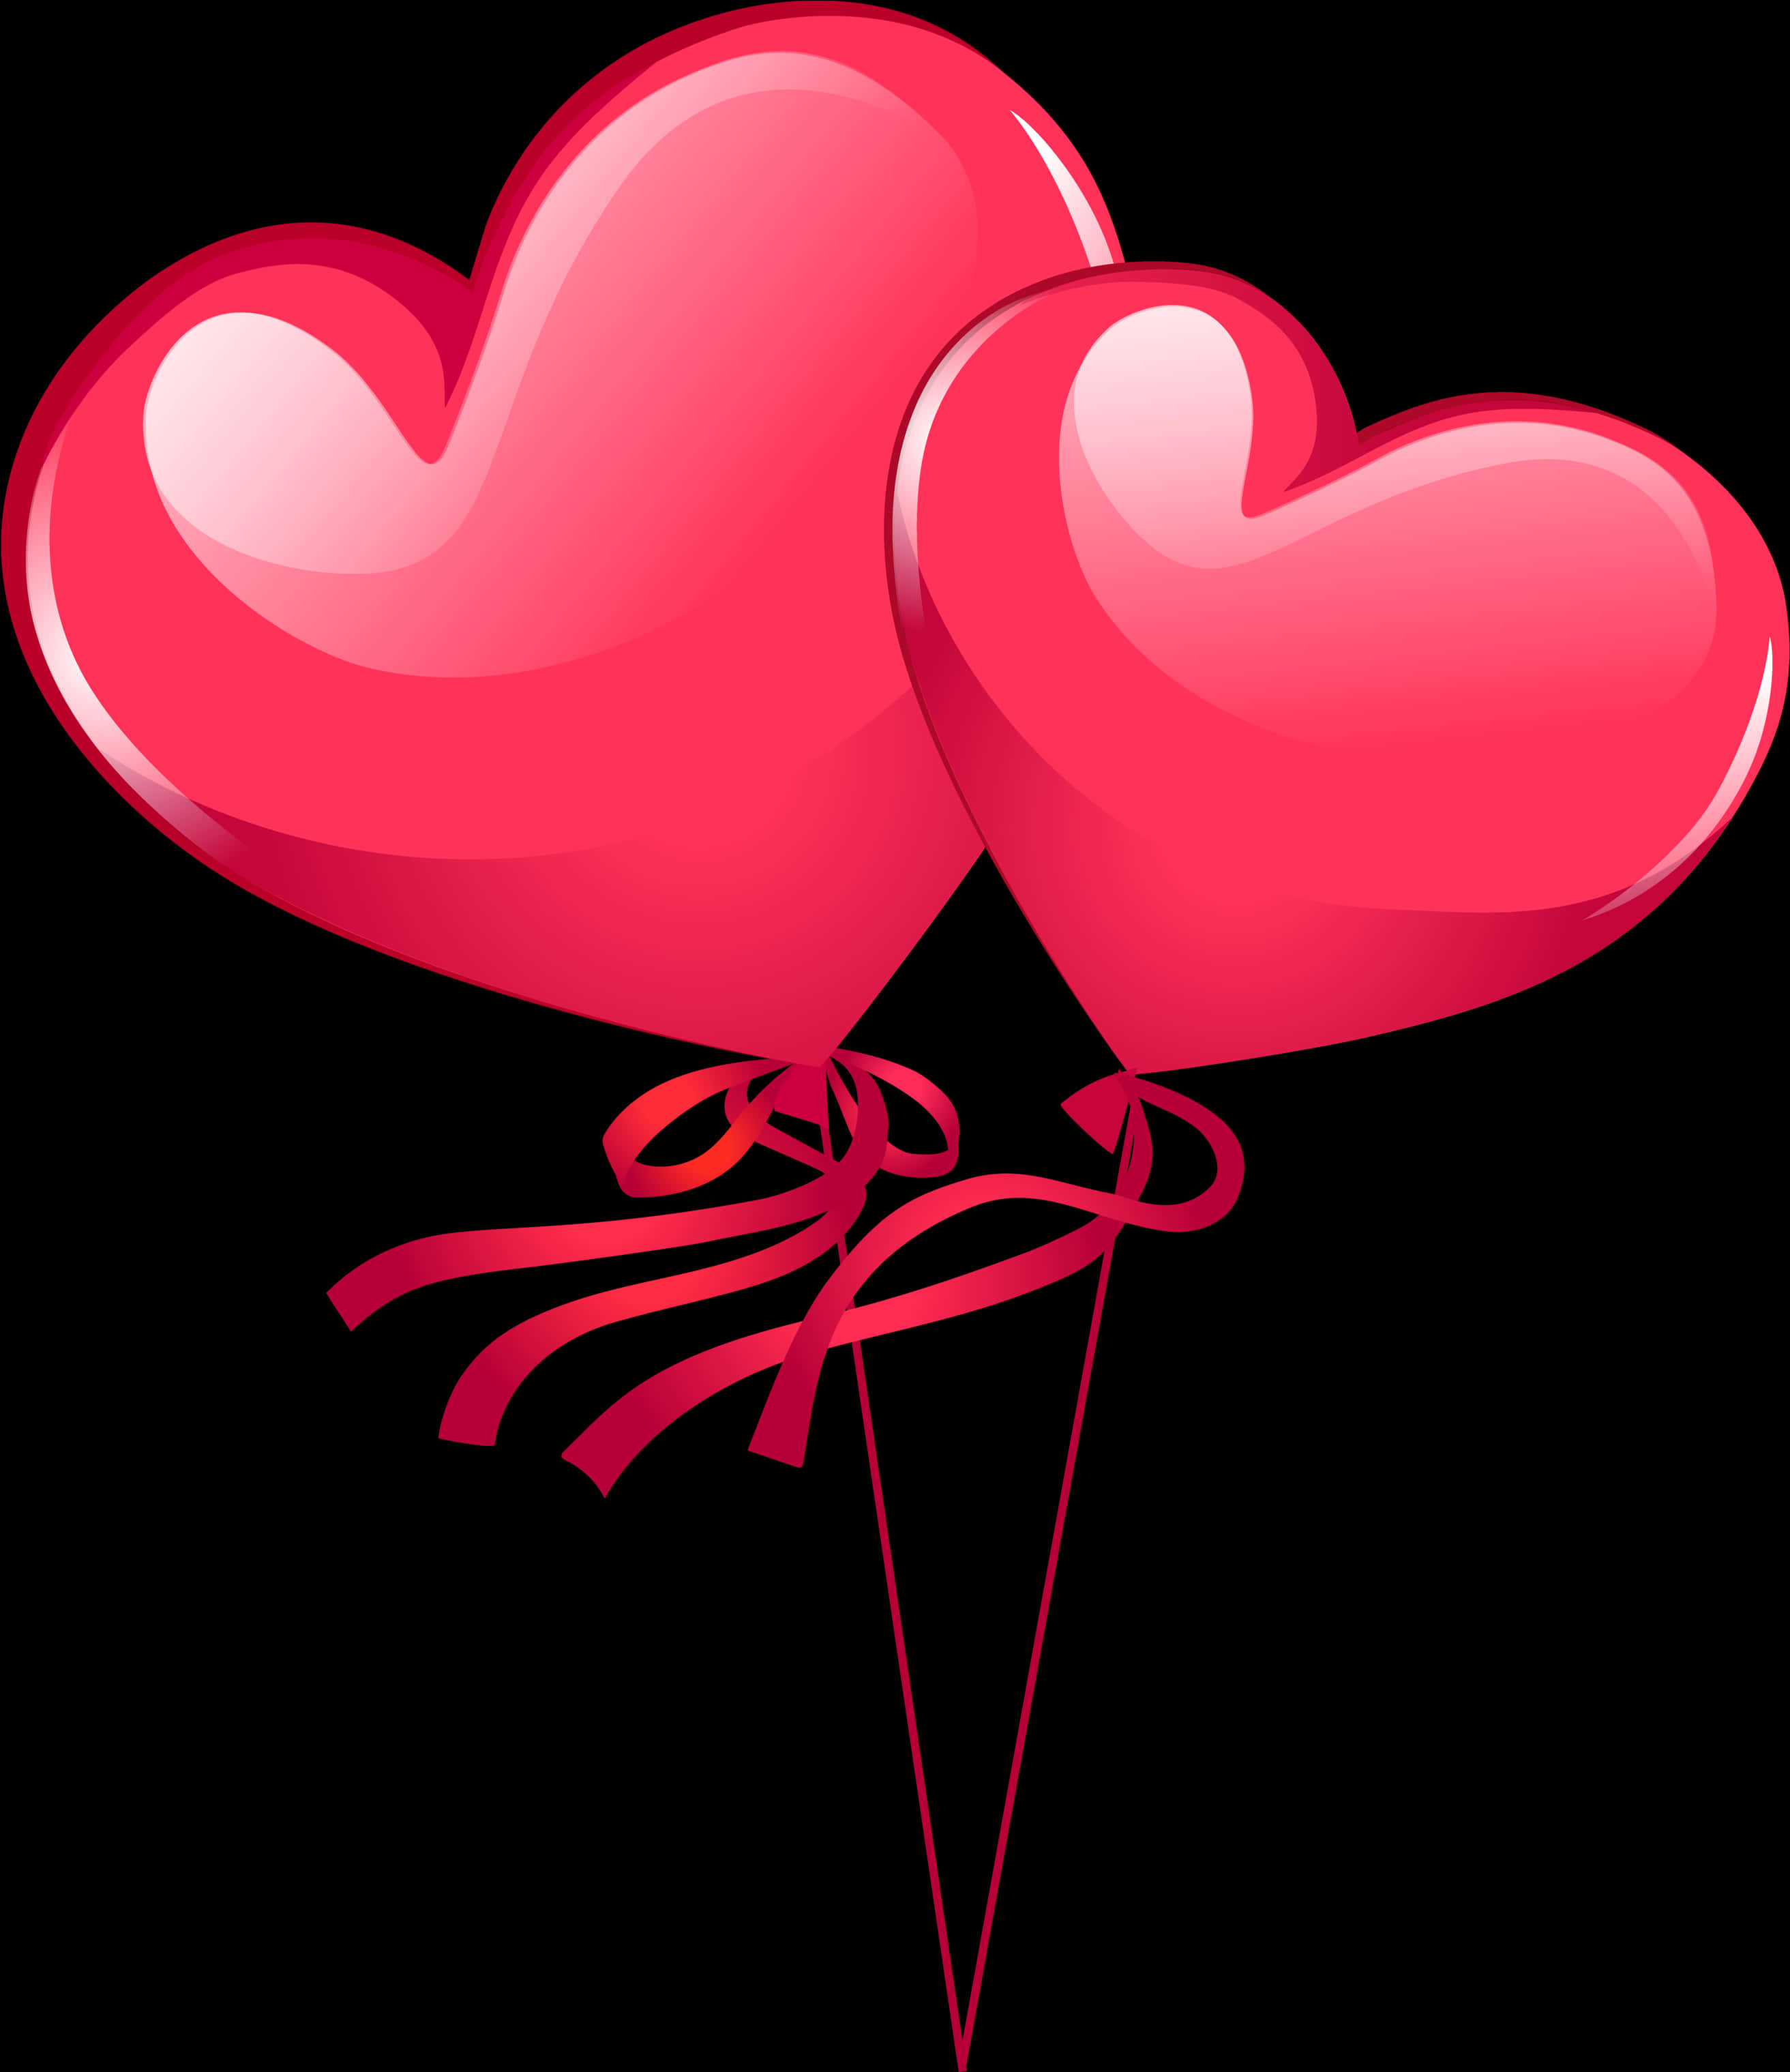 Red Heart Balloons Illustration PNG